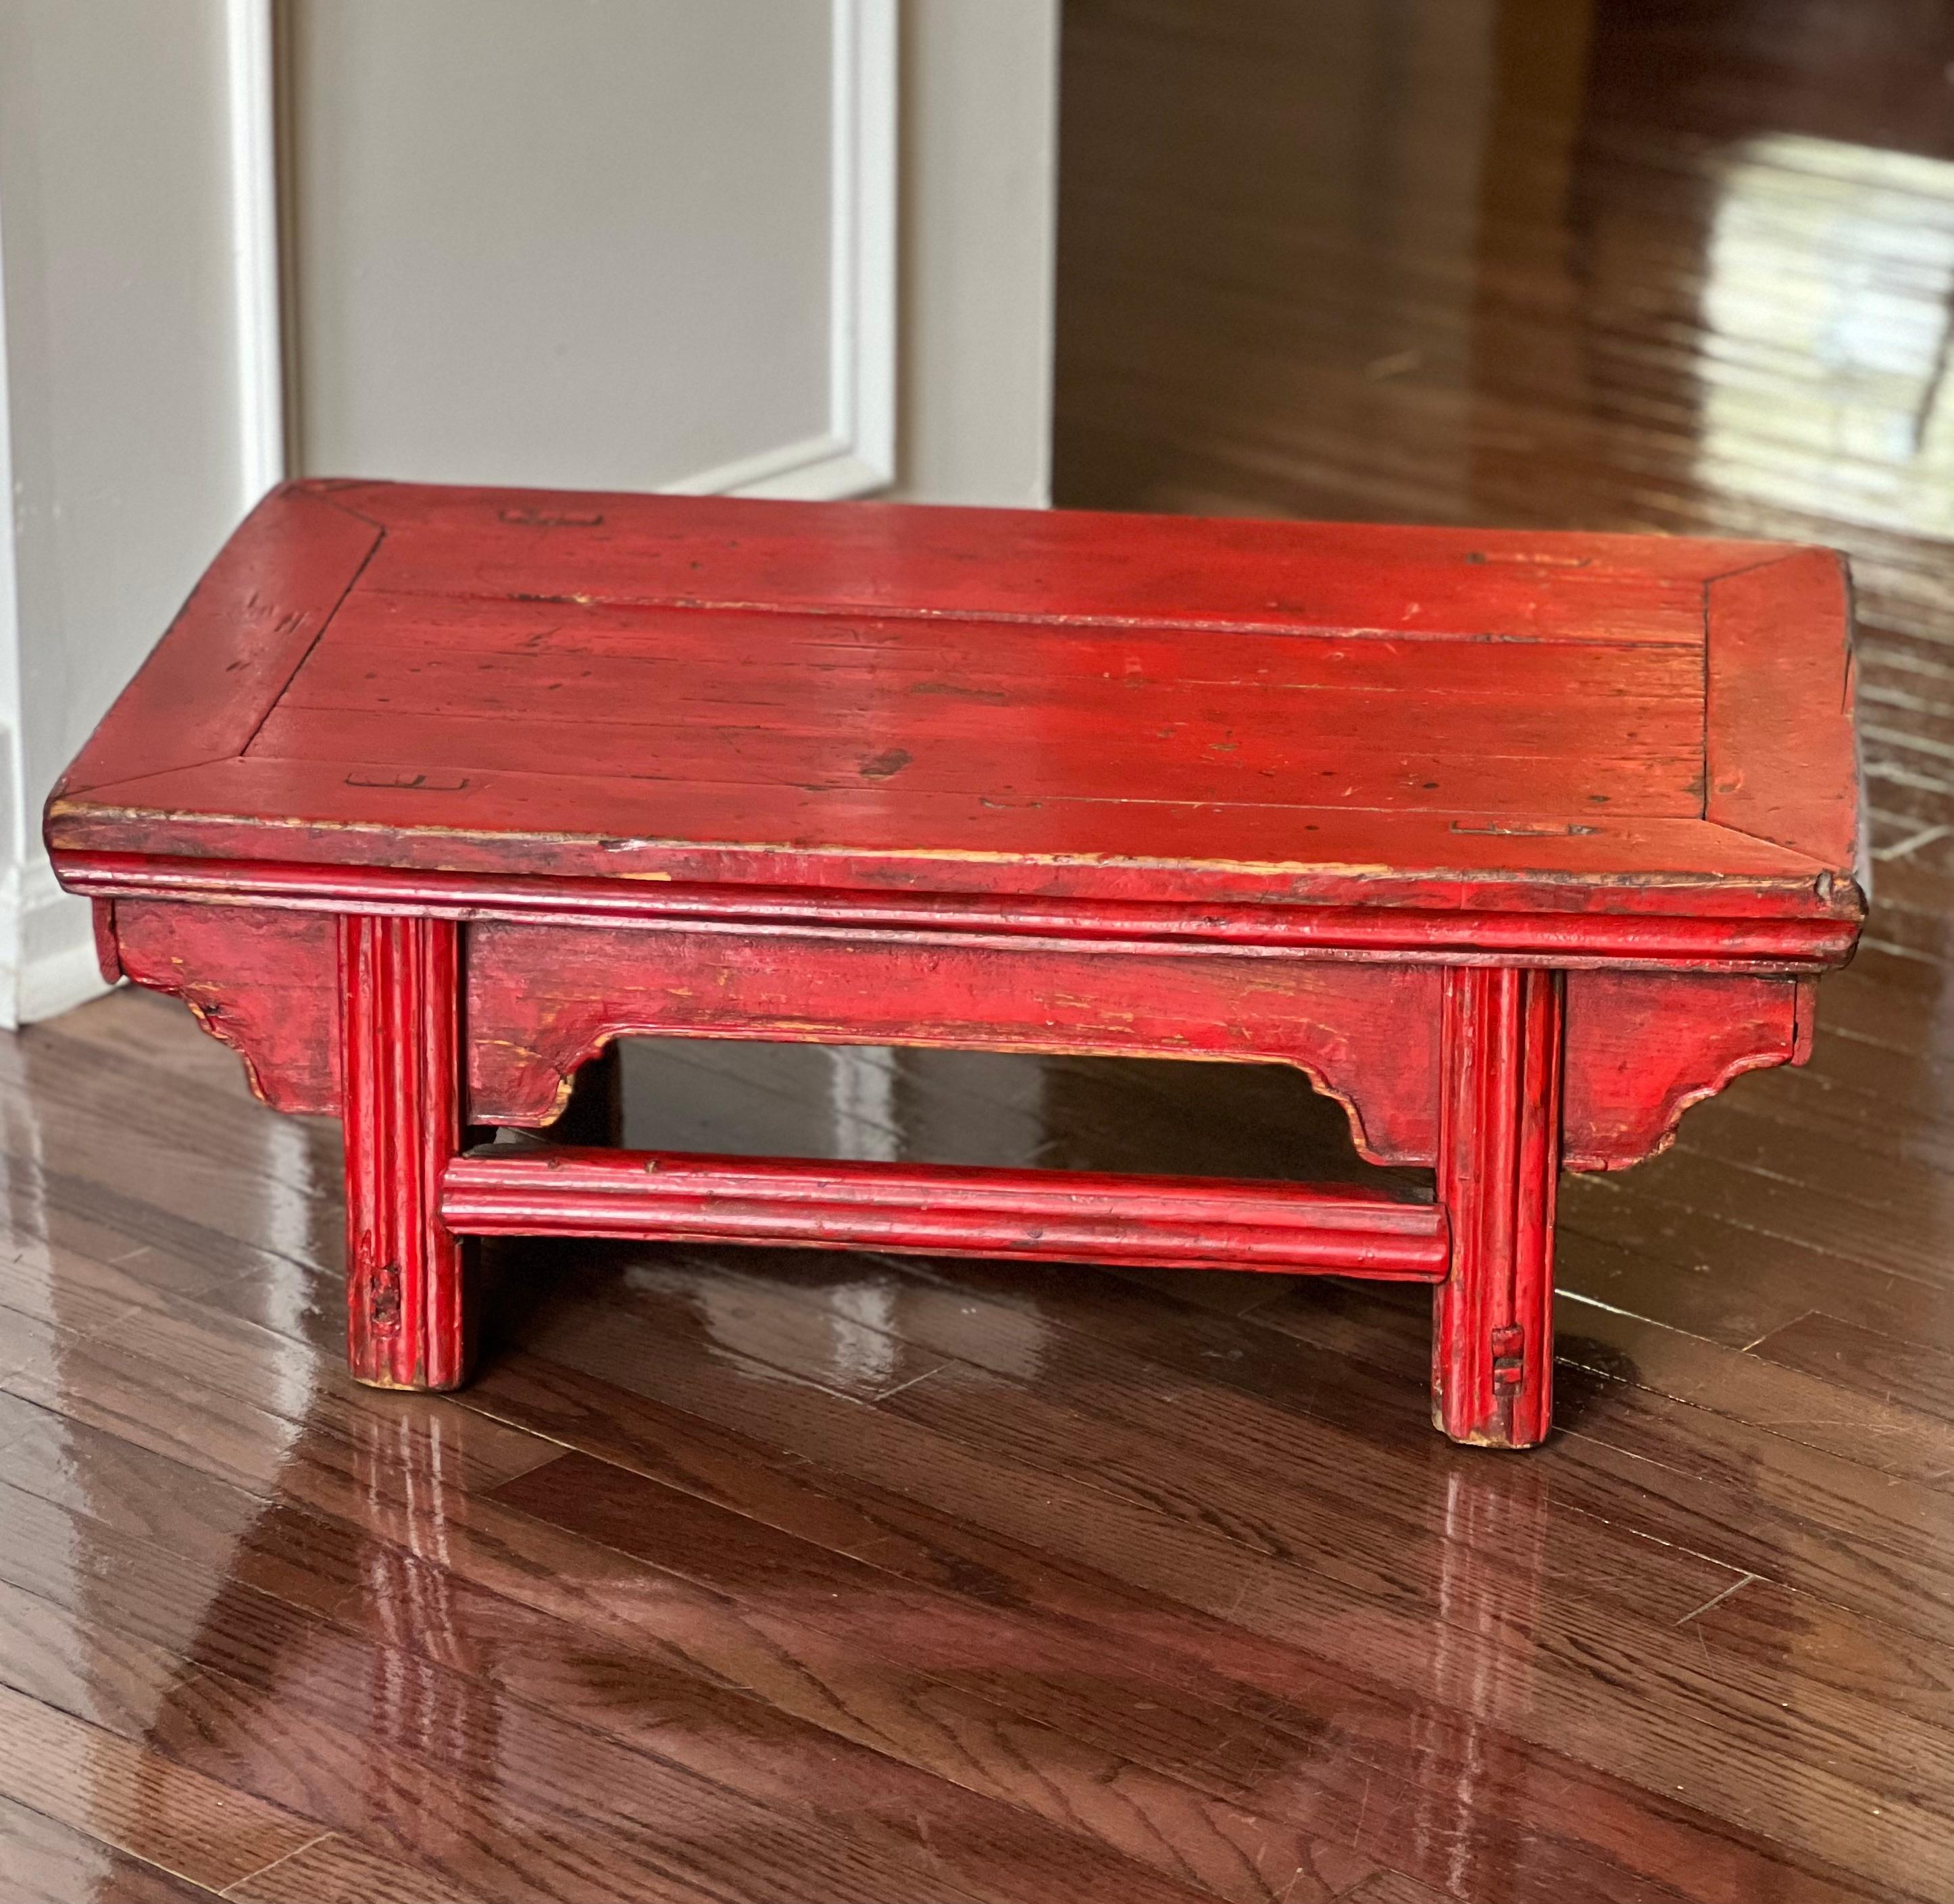 Antique Chinese red lacquer low Kang table, c. 1910's.

The Kang table has a rich history as it was used in everyday life for dining, having tea, playing games and meditation. The table features classic mortise and tenon joinery ensuring both